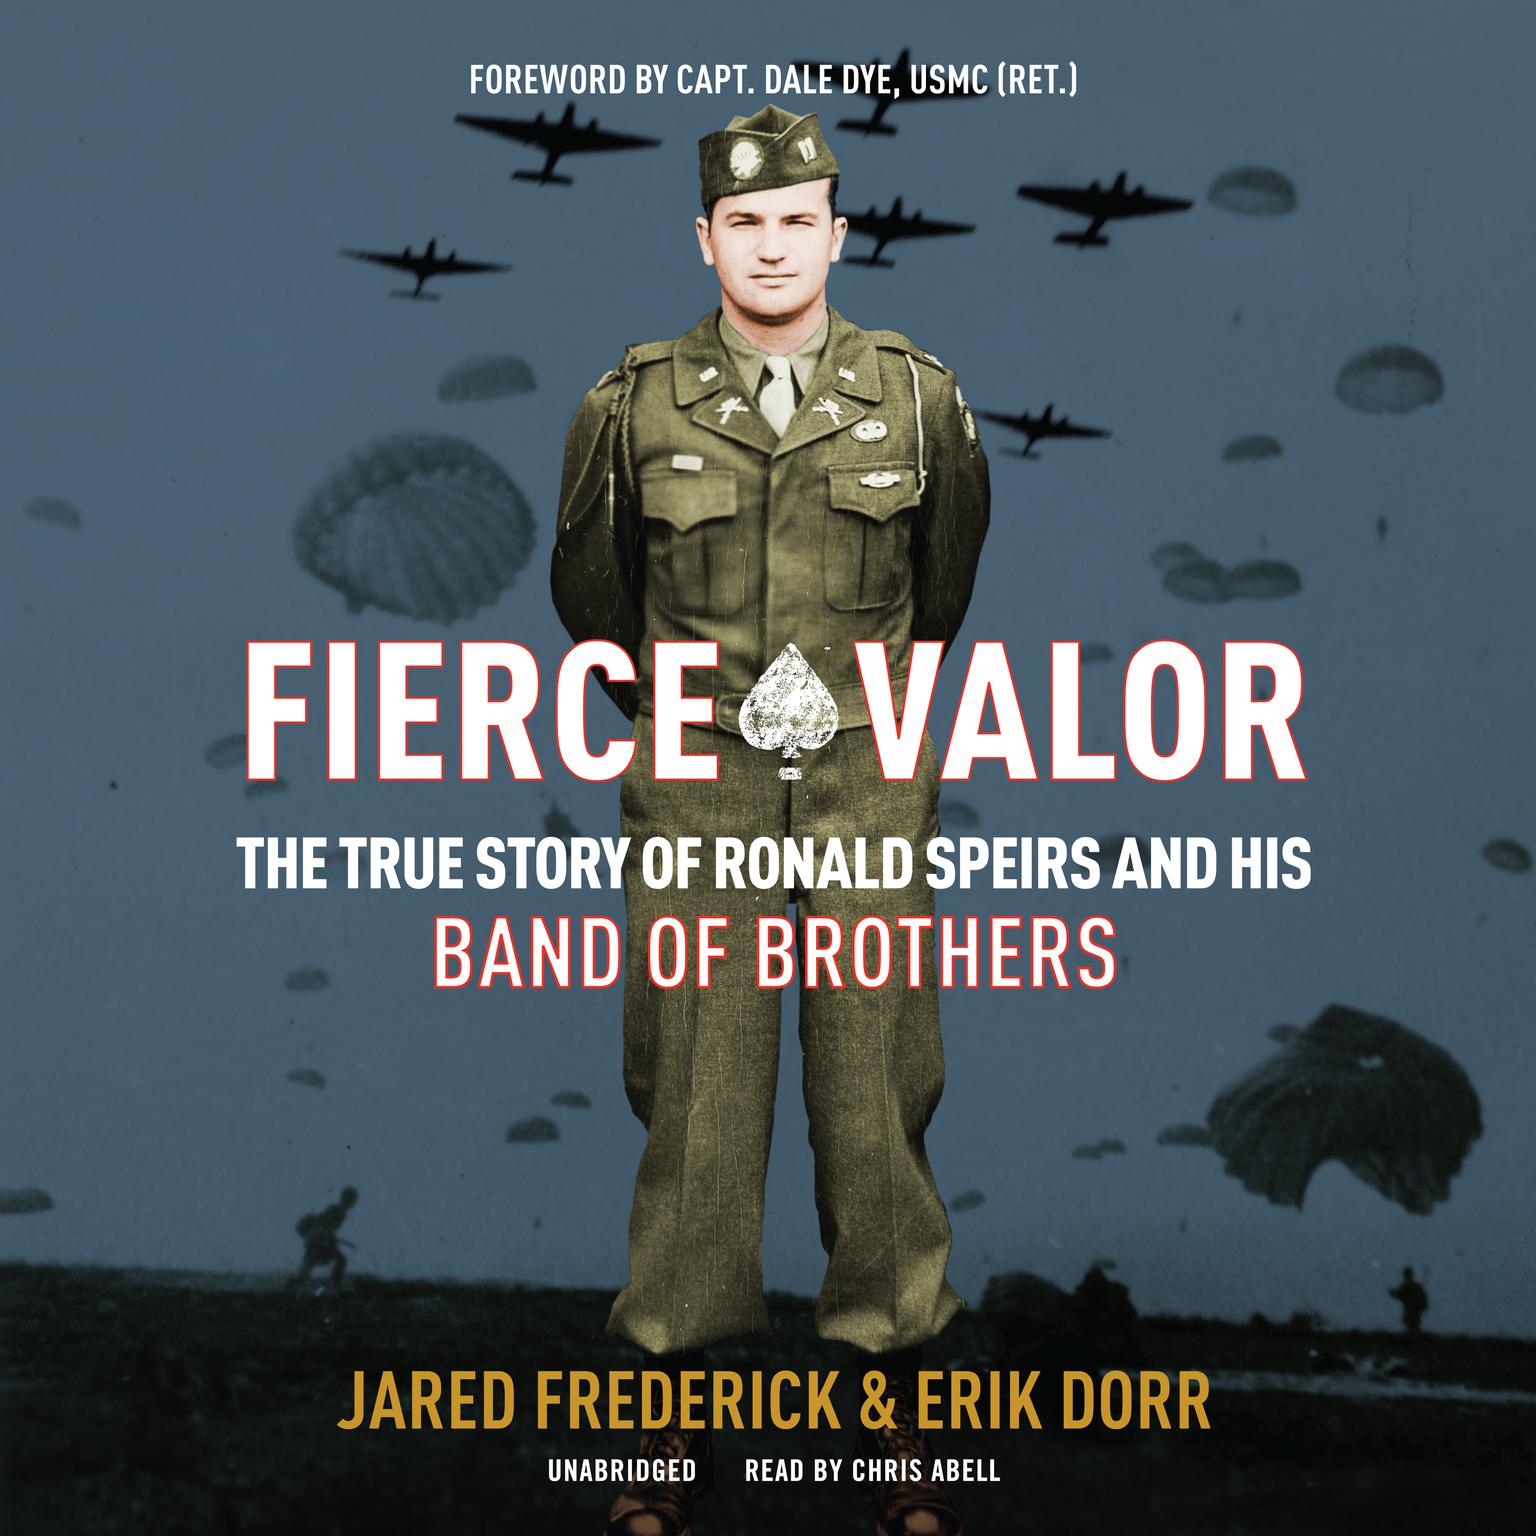 Fierce Valor: The True Story of Ronald Speirs and His Band of Brothers  Audiobook, by Jared Frederick